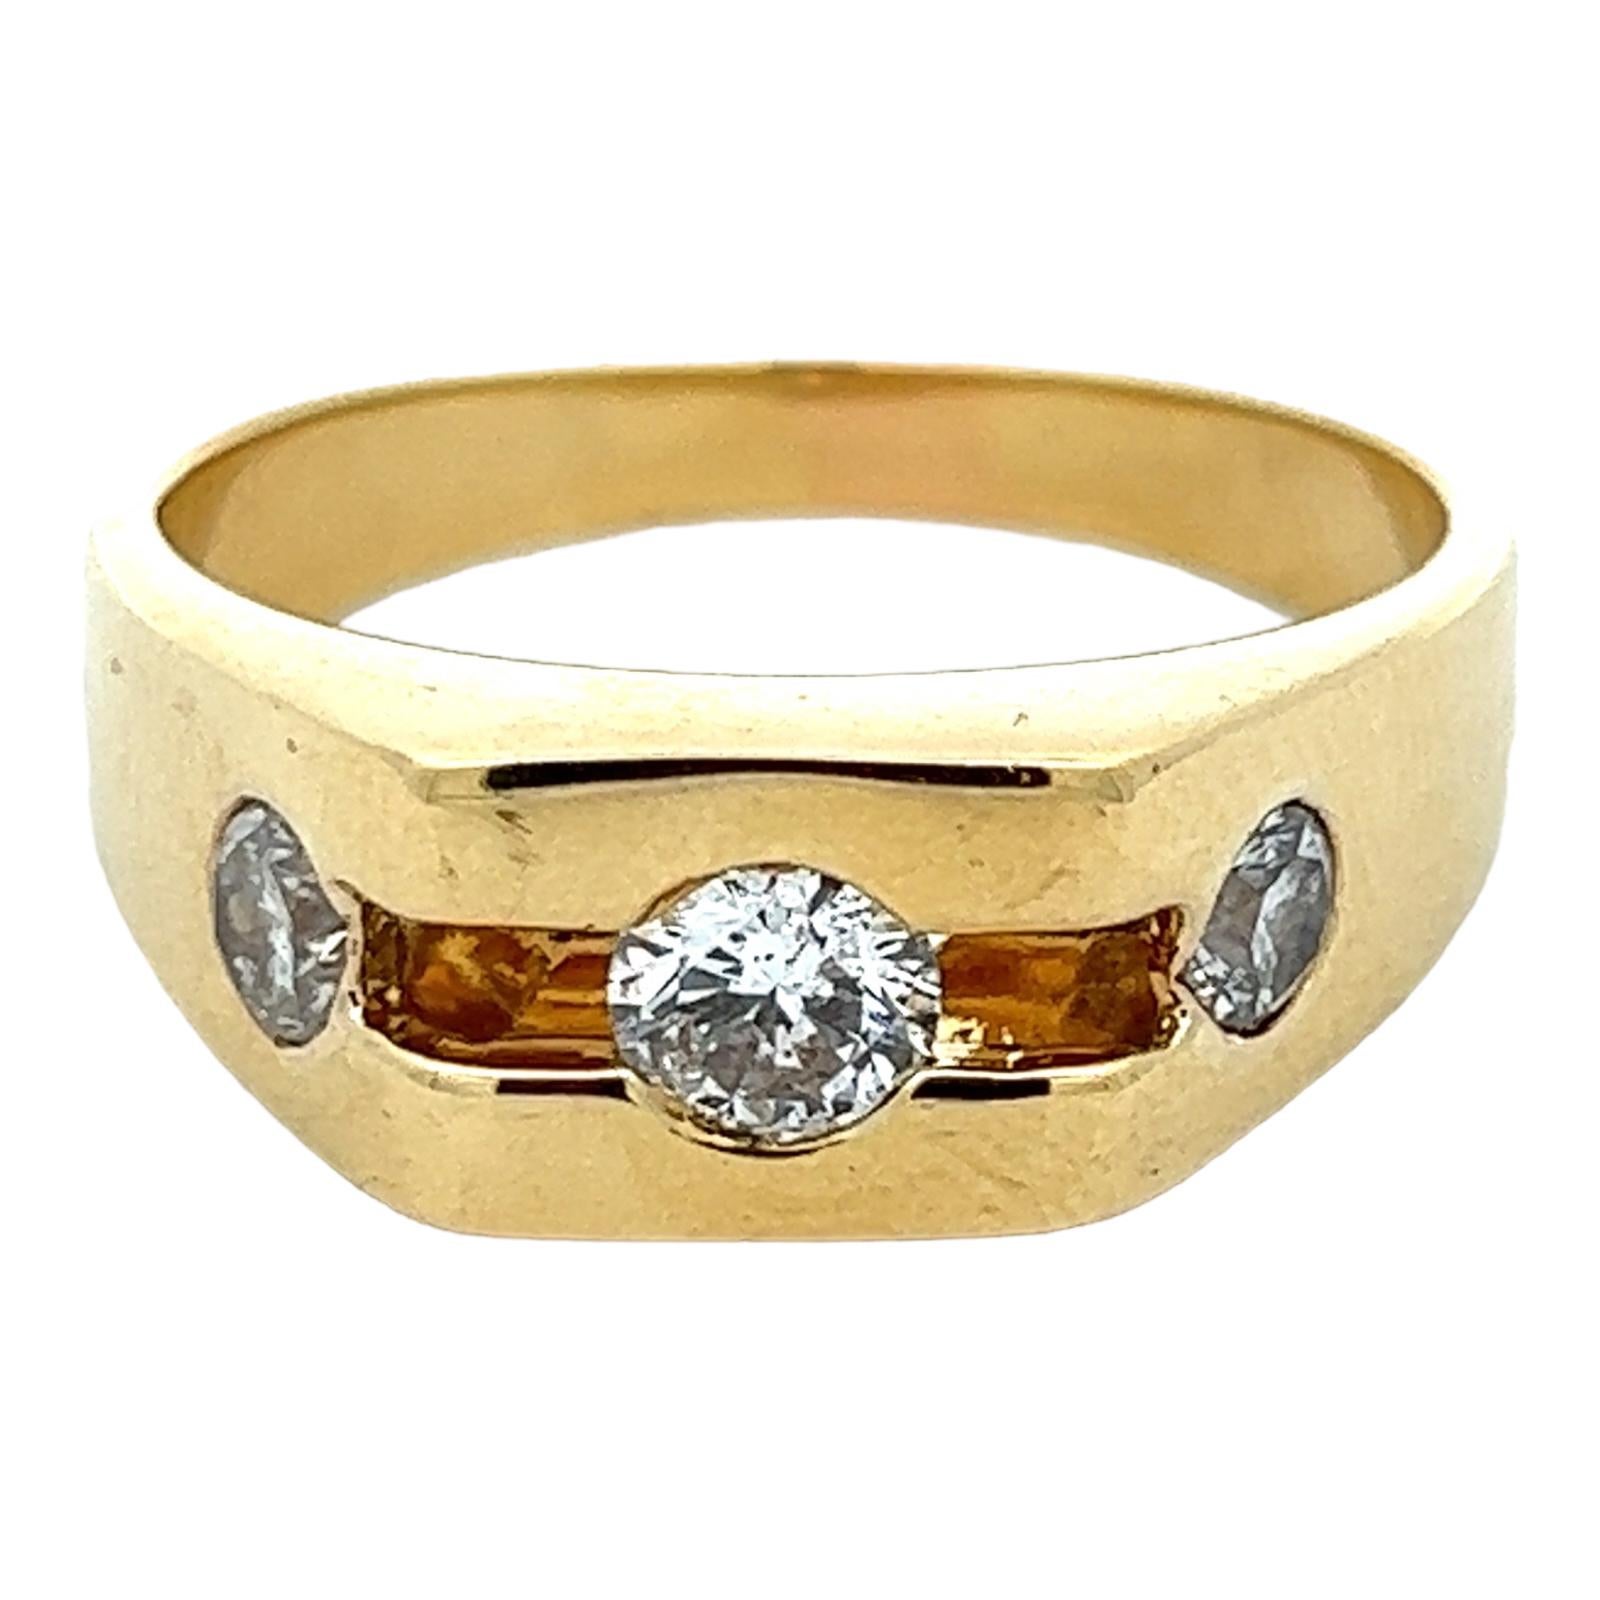 Gents three diamond wedding band ring handcrafted in 18 karat yellow gold. The band features 3 round briliant cut diamonds weighing approximately 1.00 CTW (the center is .50 CT and the two sides .50 CTW). The diamonds are graded G-H color and SI